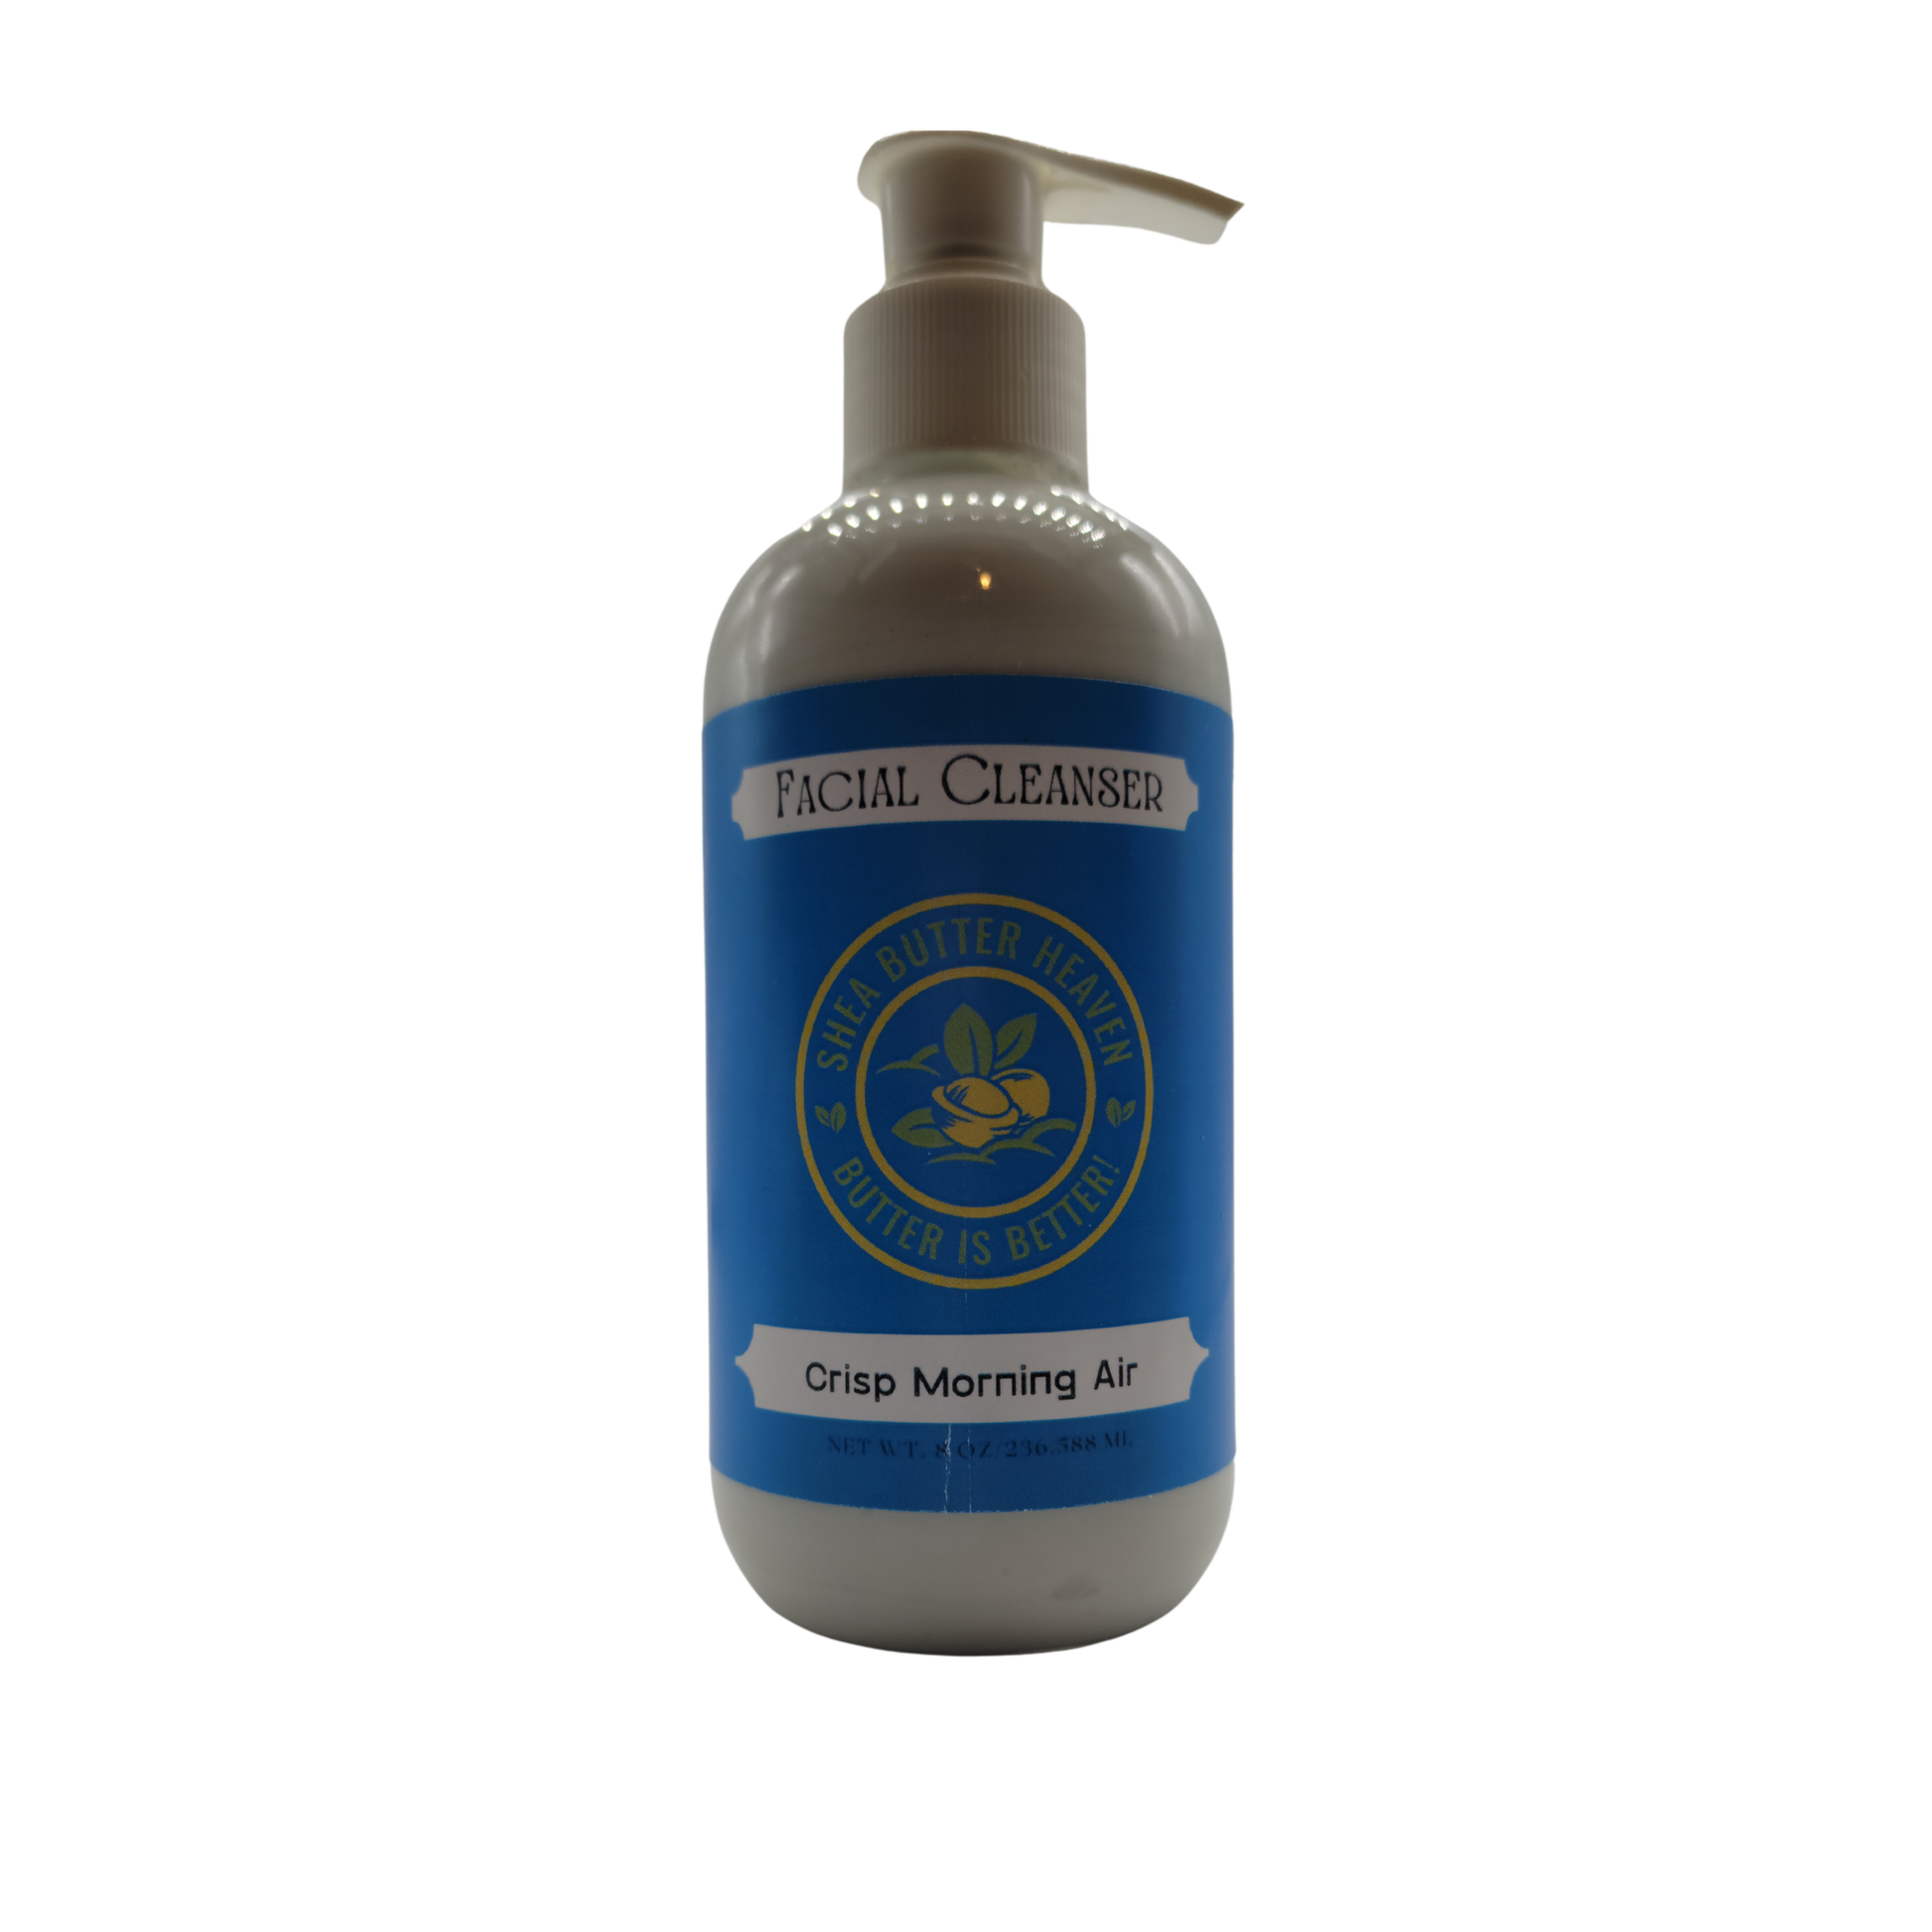 Crisp Morning Air smells like a fresh citrus burst of lime, lemon, bergamot, and ozone open the fragrance while a heart of lily, jasmine, and willow compliment a rich base of mint, patchouli, and musk.  8 oz facial cleanser